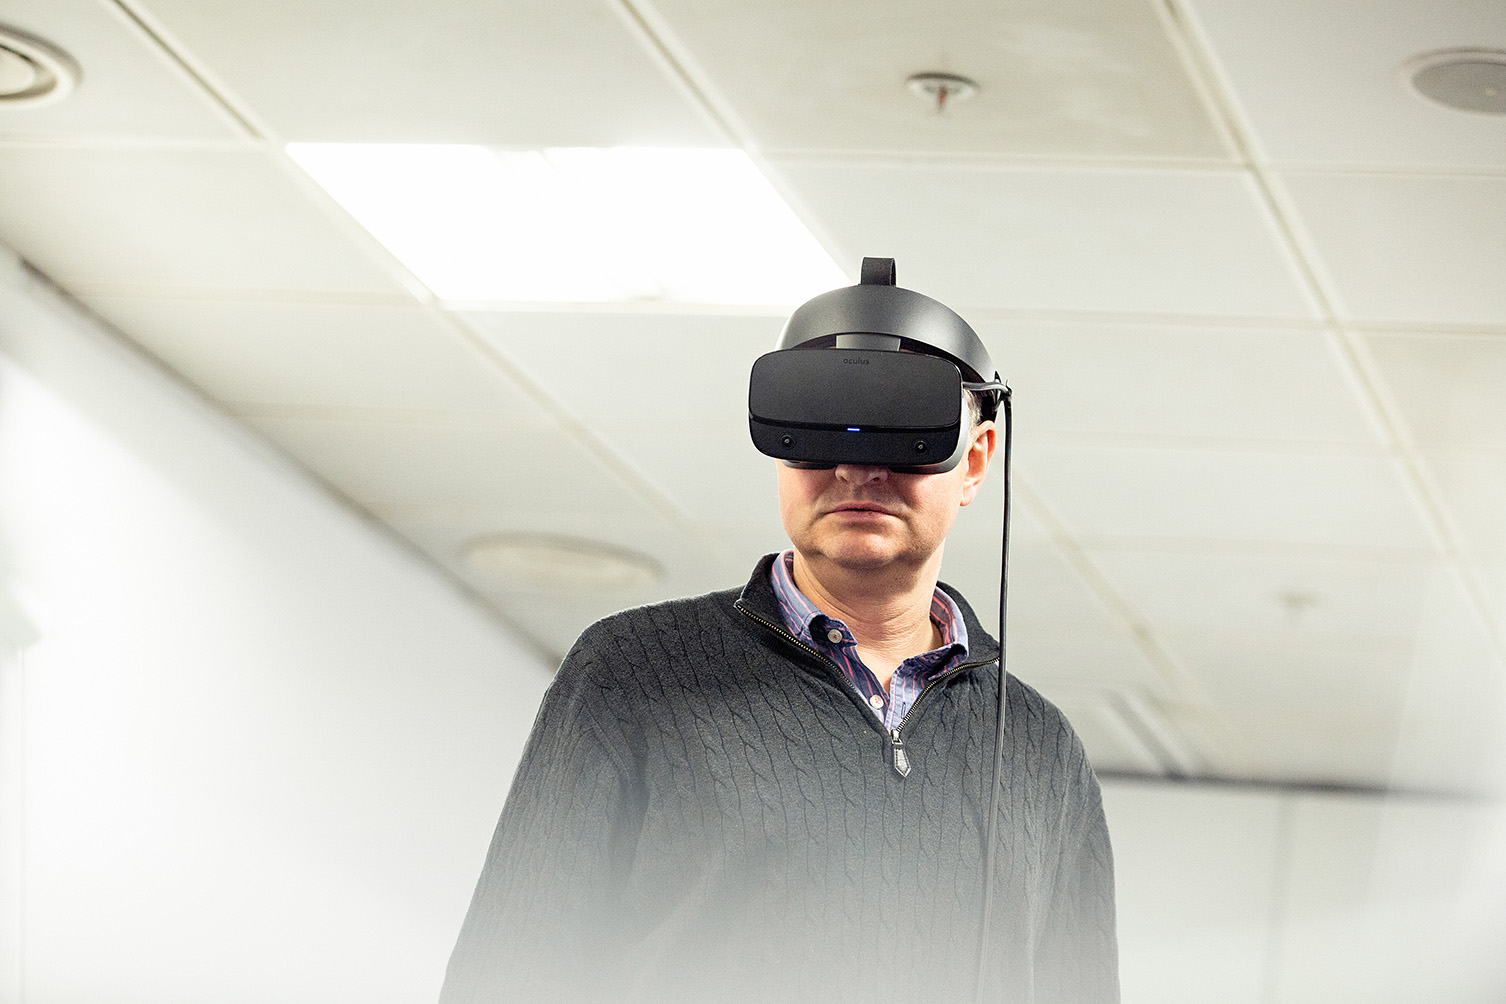 Oxford VR are finalists in the Med-Tech Innovation Awards 2020